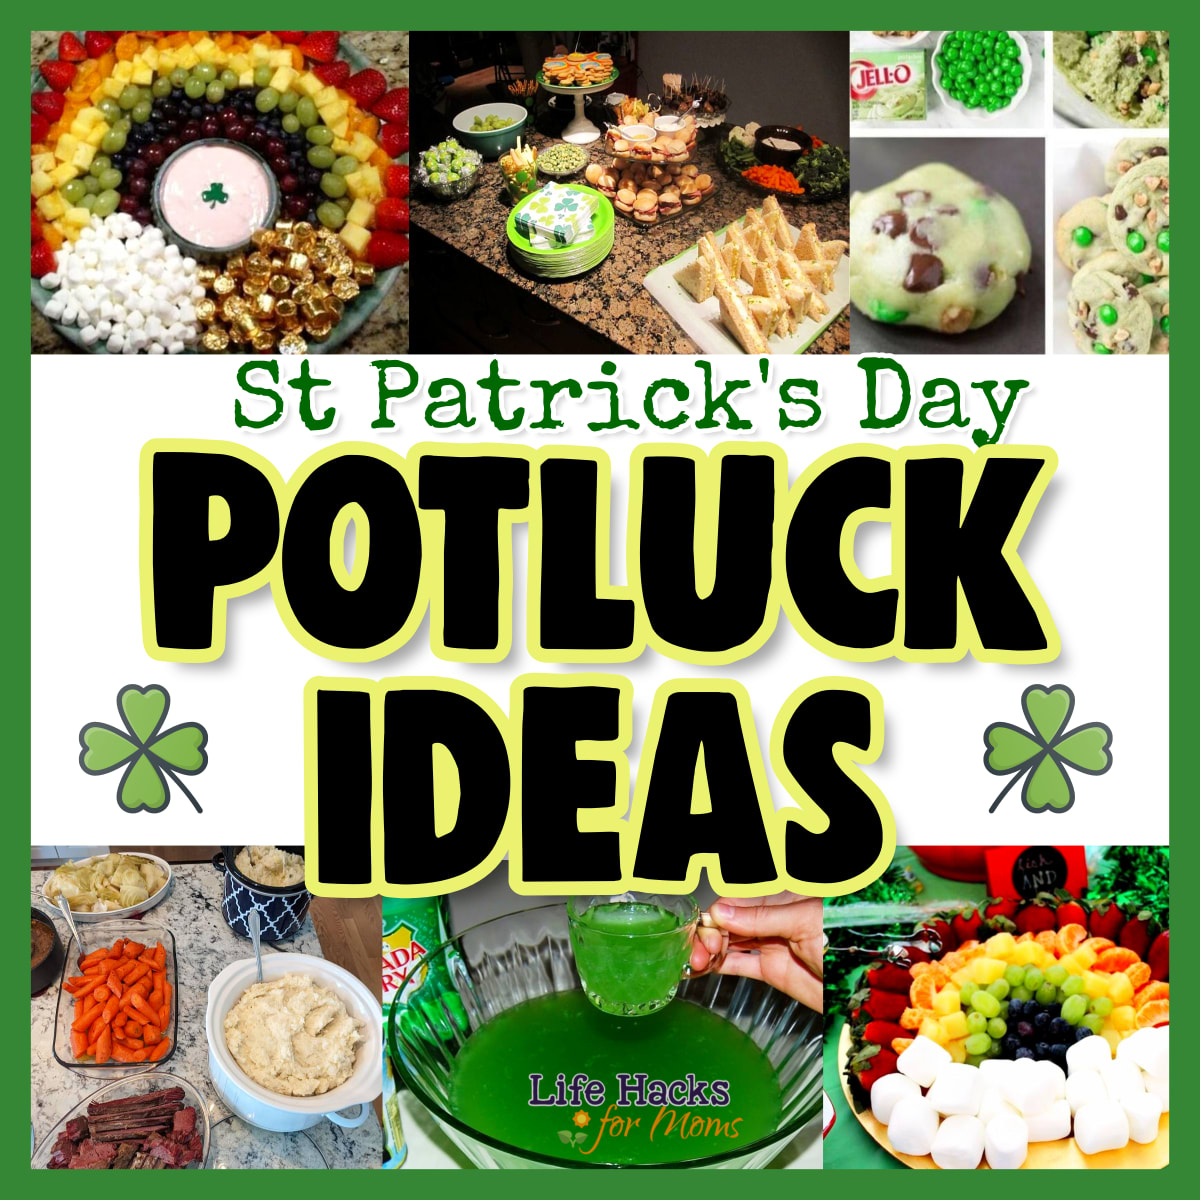 St Patrick's Day Potluck Ideas for Work - St Paddys Day Party Food for a Crowd